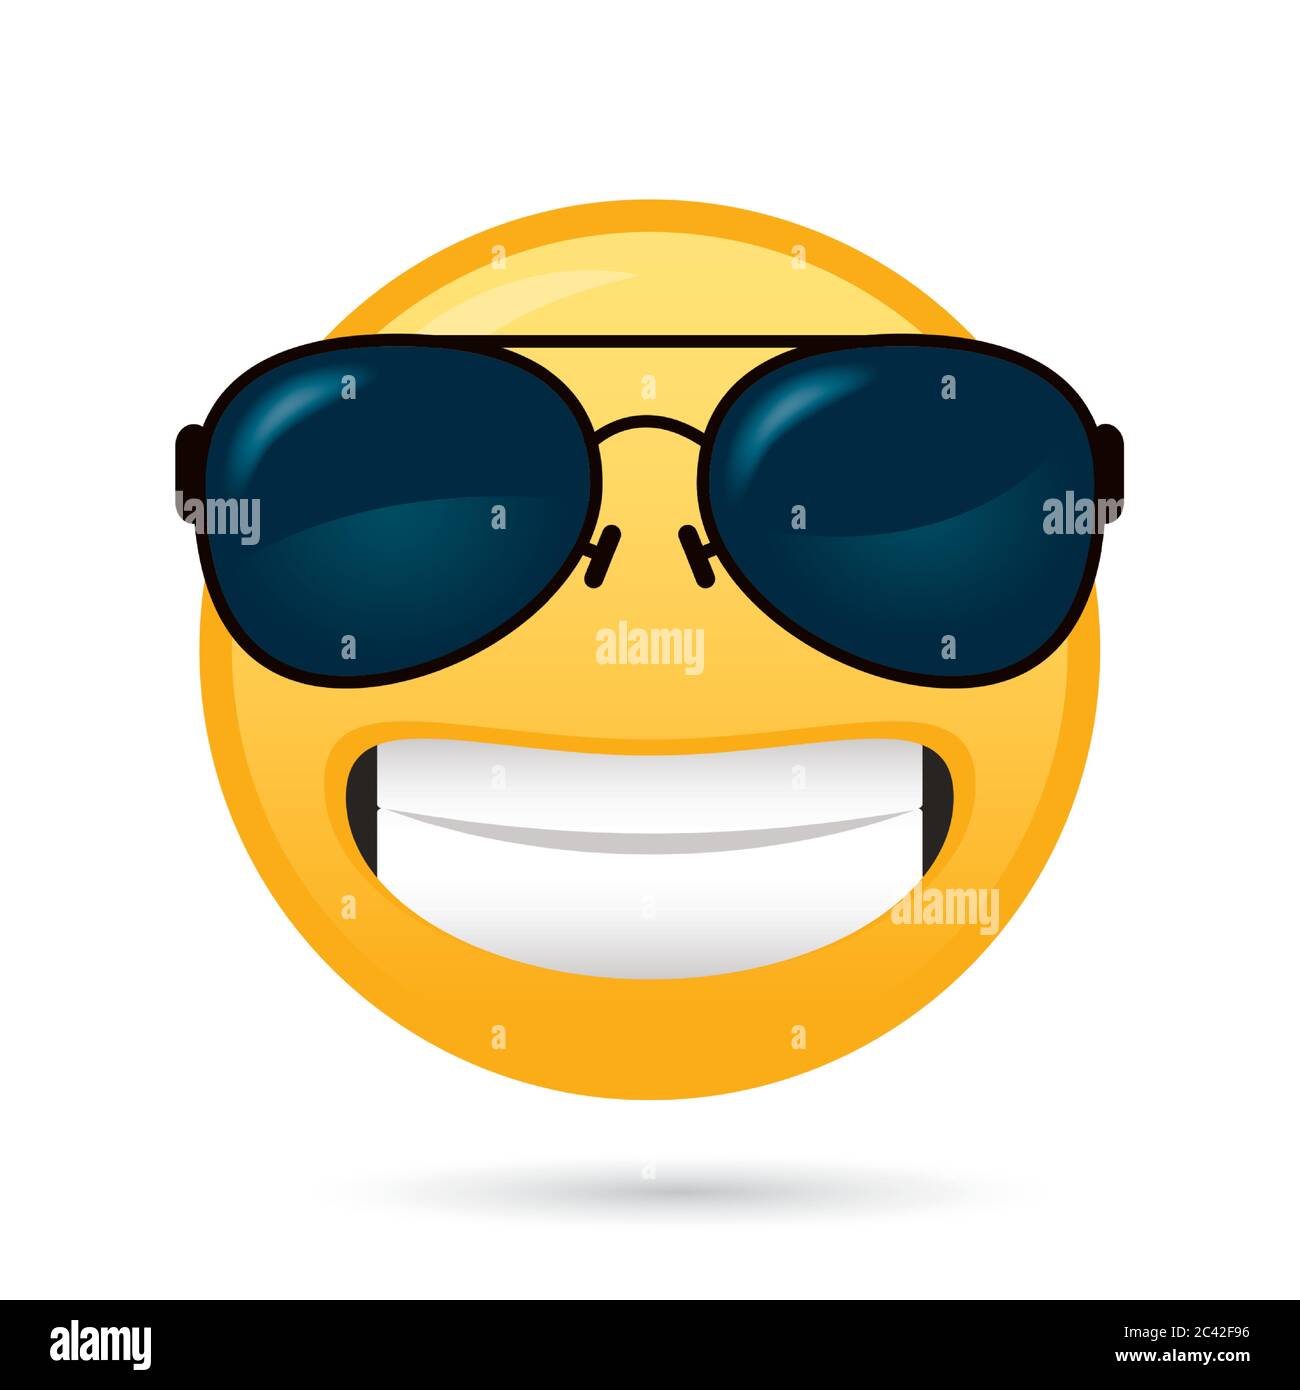 emoji face with sunglasses funny character vector illustration design Stock Vector